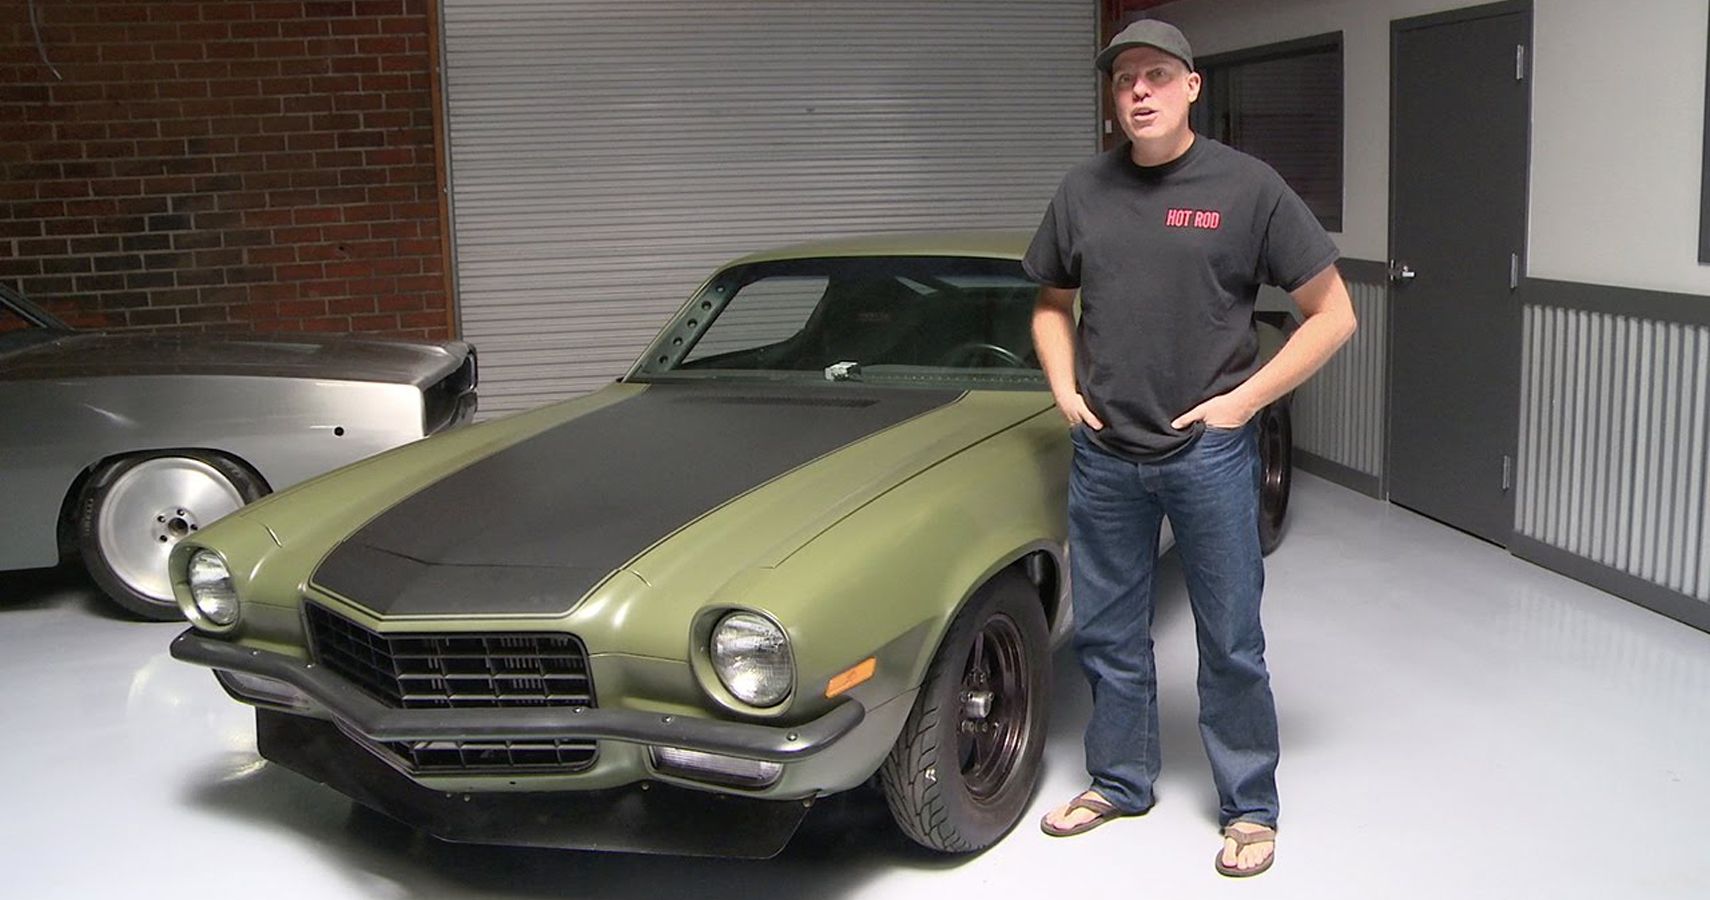 The F-Bomb Camaro Belongs To David Freiburger, The Former Editor Of Hot Rod Magazine And The Current Host Of Engine Masters And Roadkill